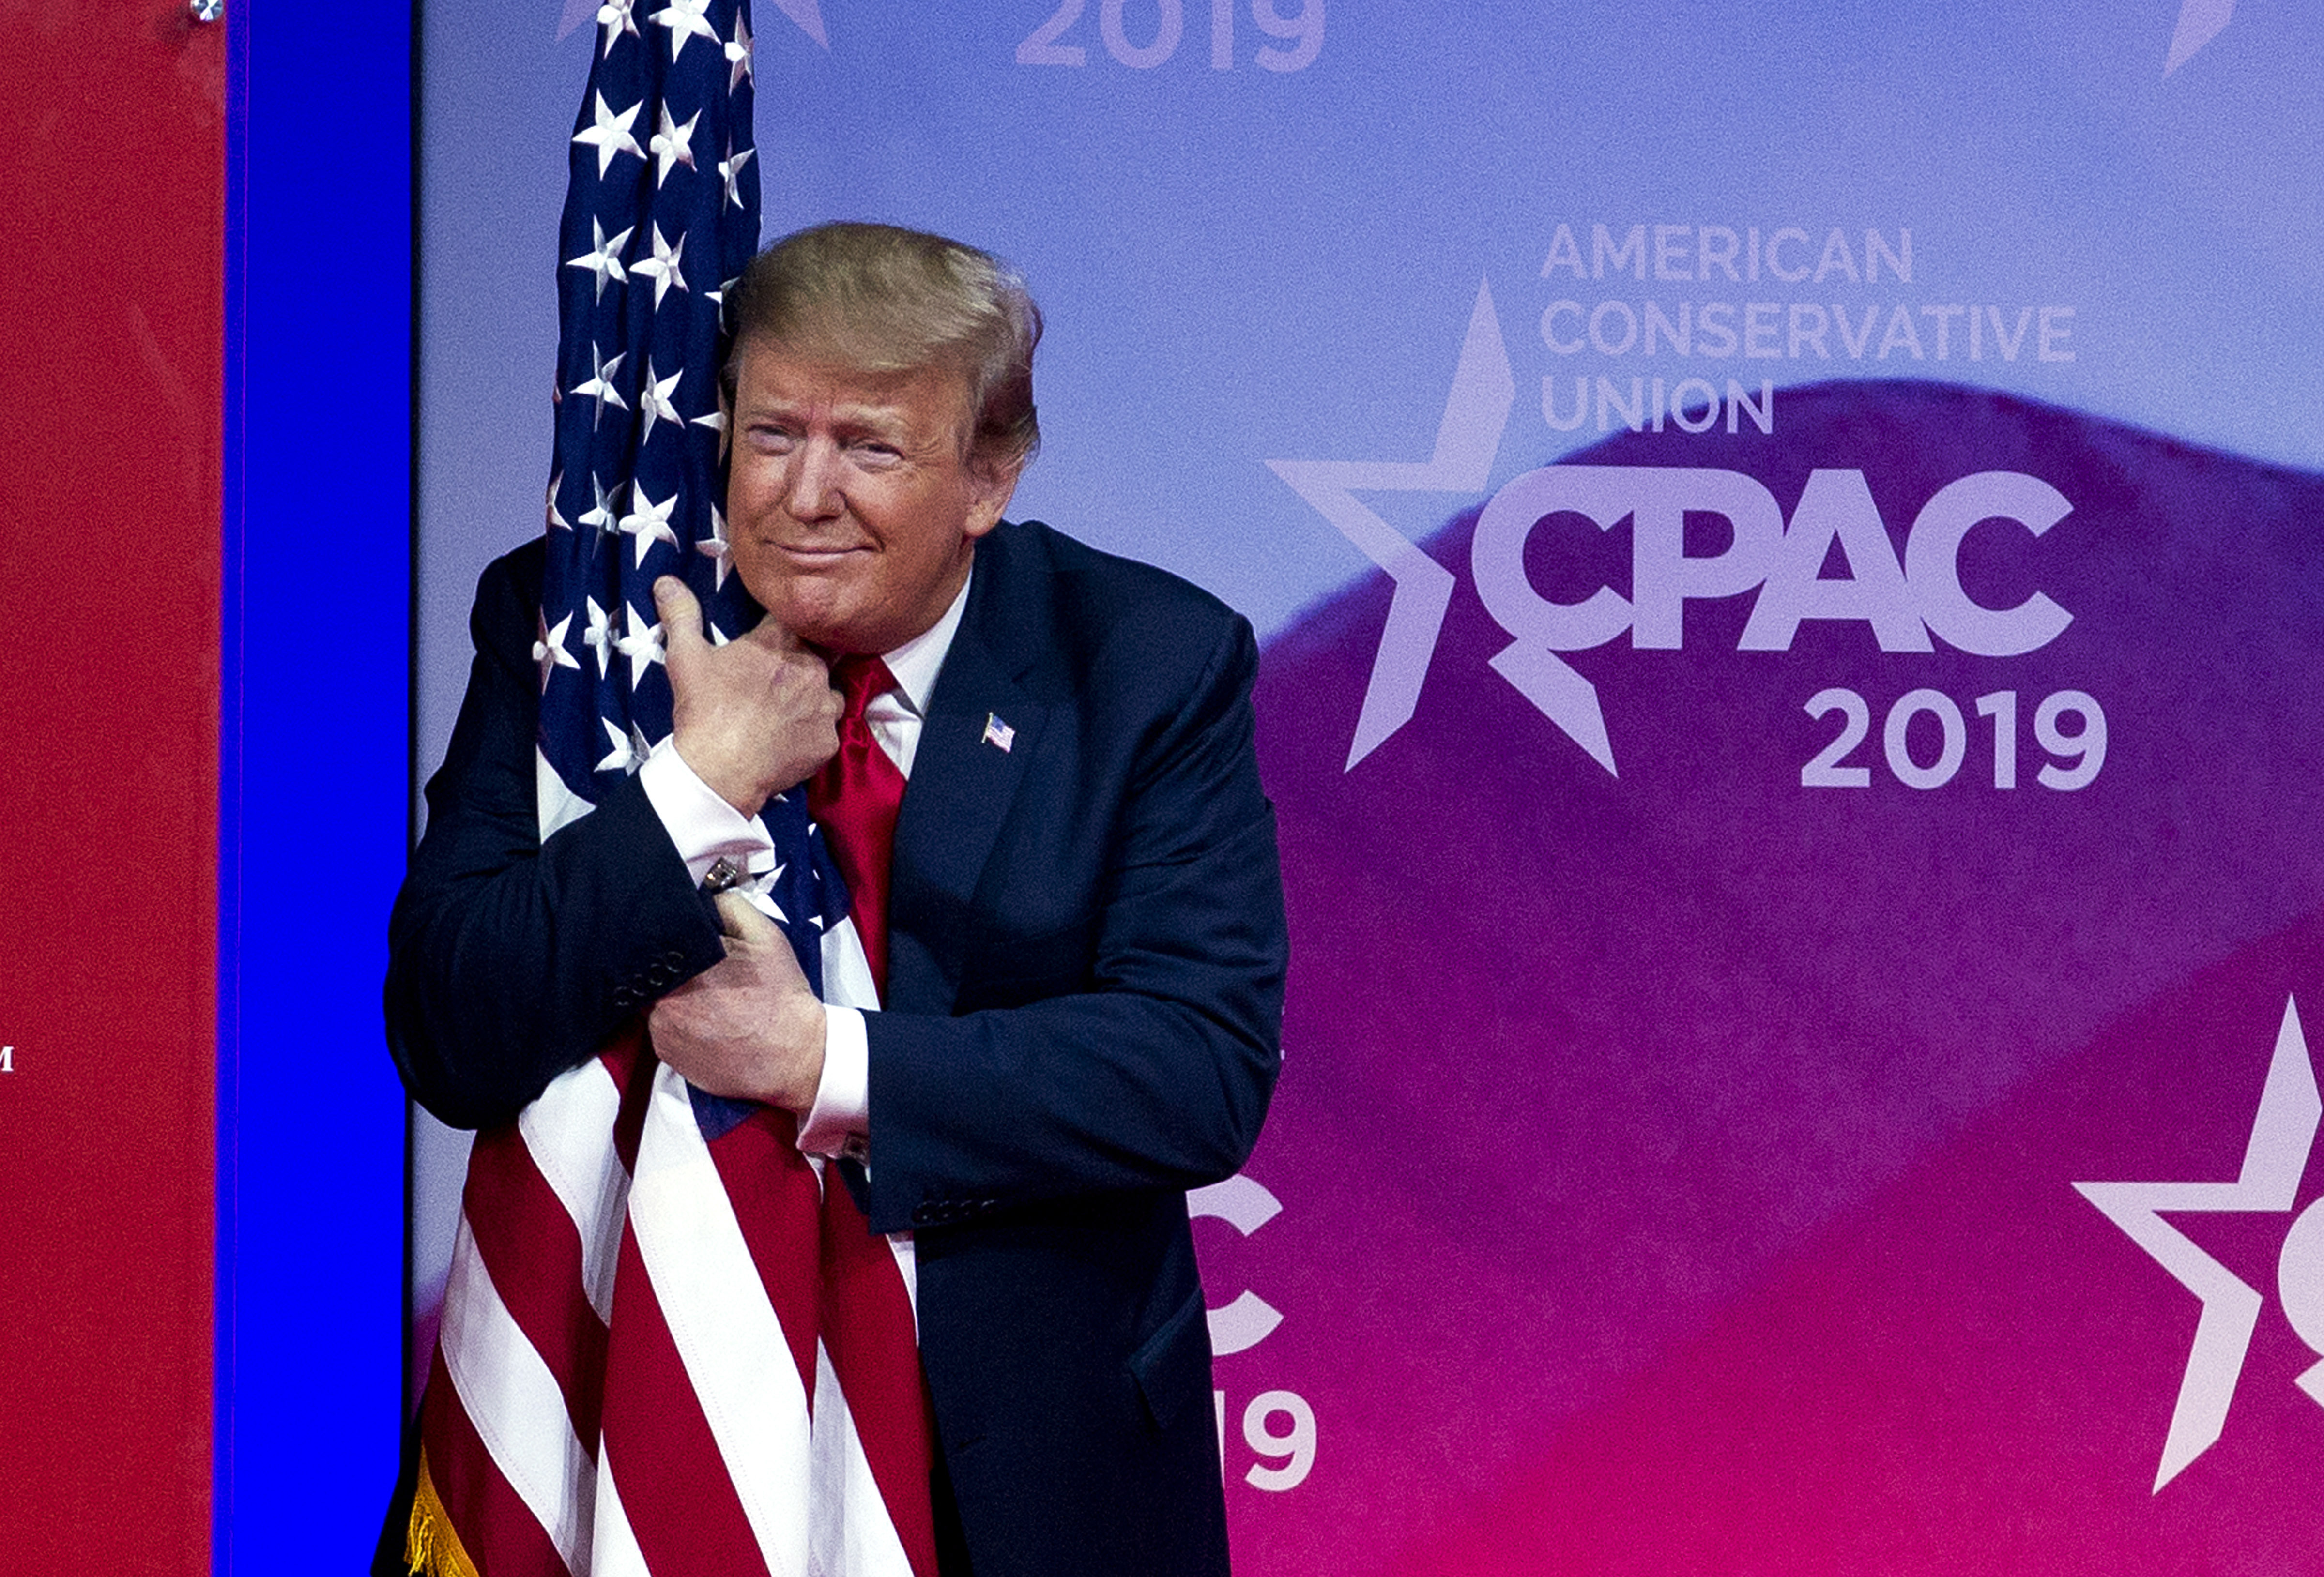 Trump Goes Off-Script at CPAC, Calls Mueller Probe Bull----, Sanders Vows to Defeat Dangerous Trump at Brooklyn Rally